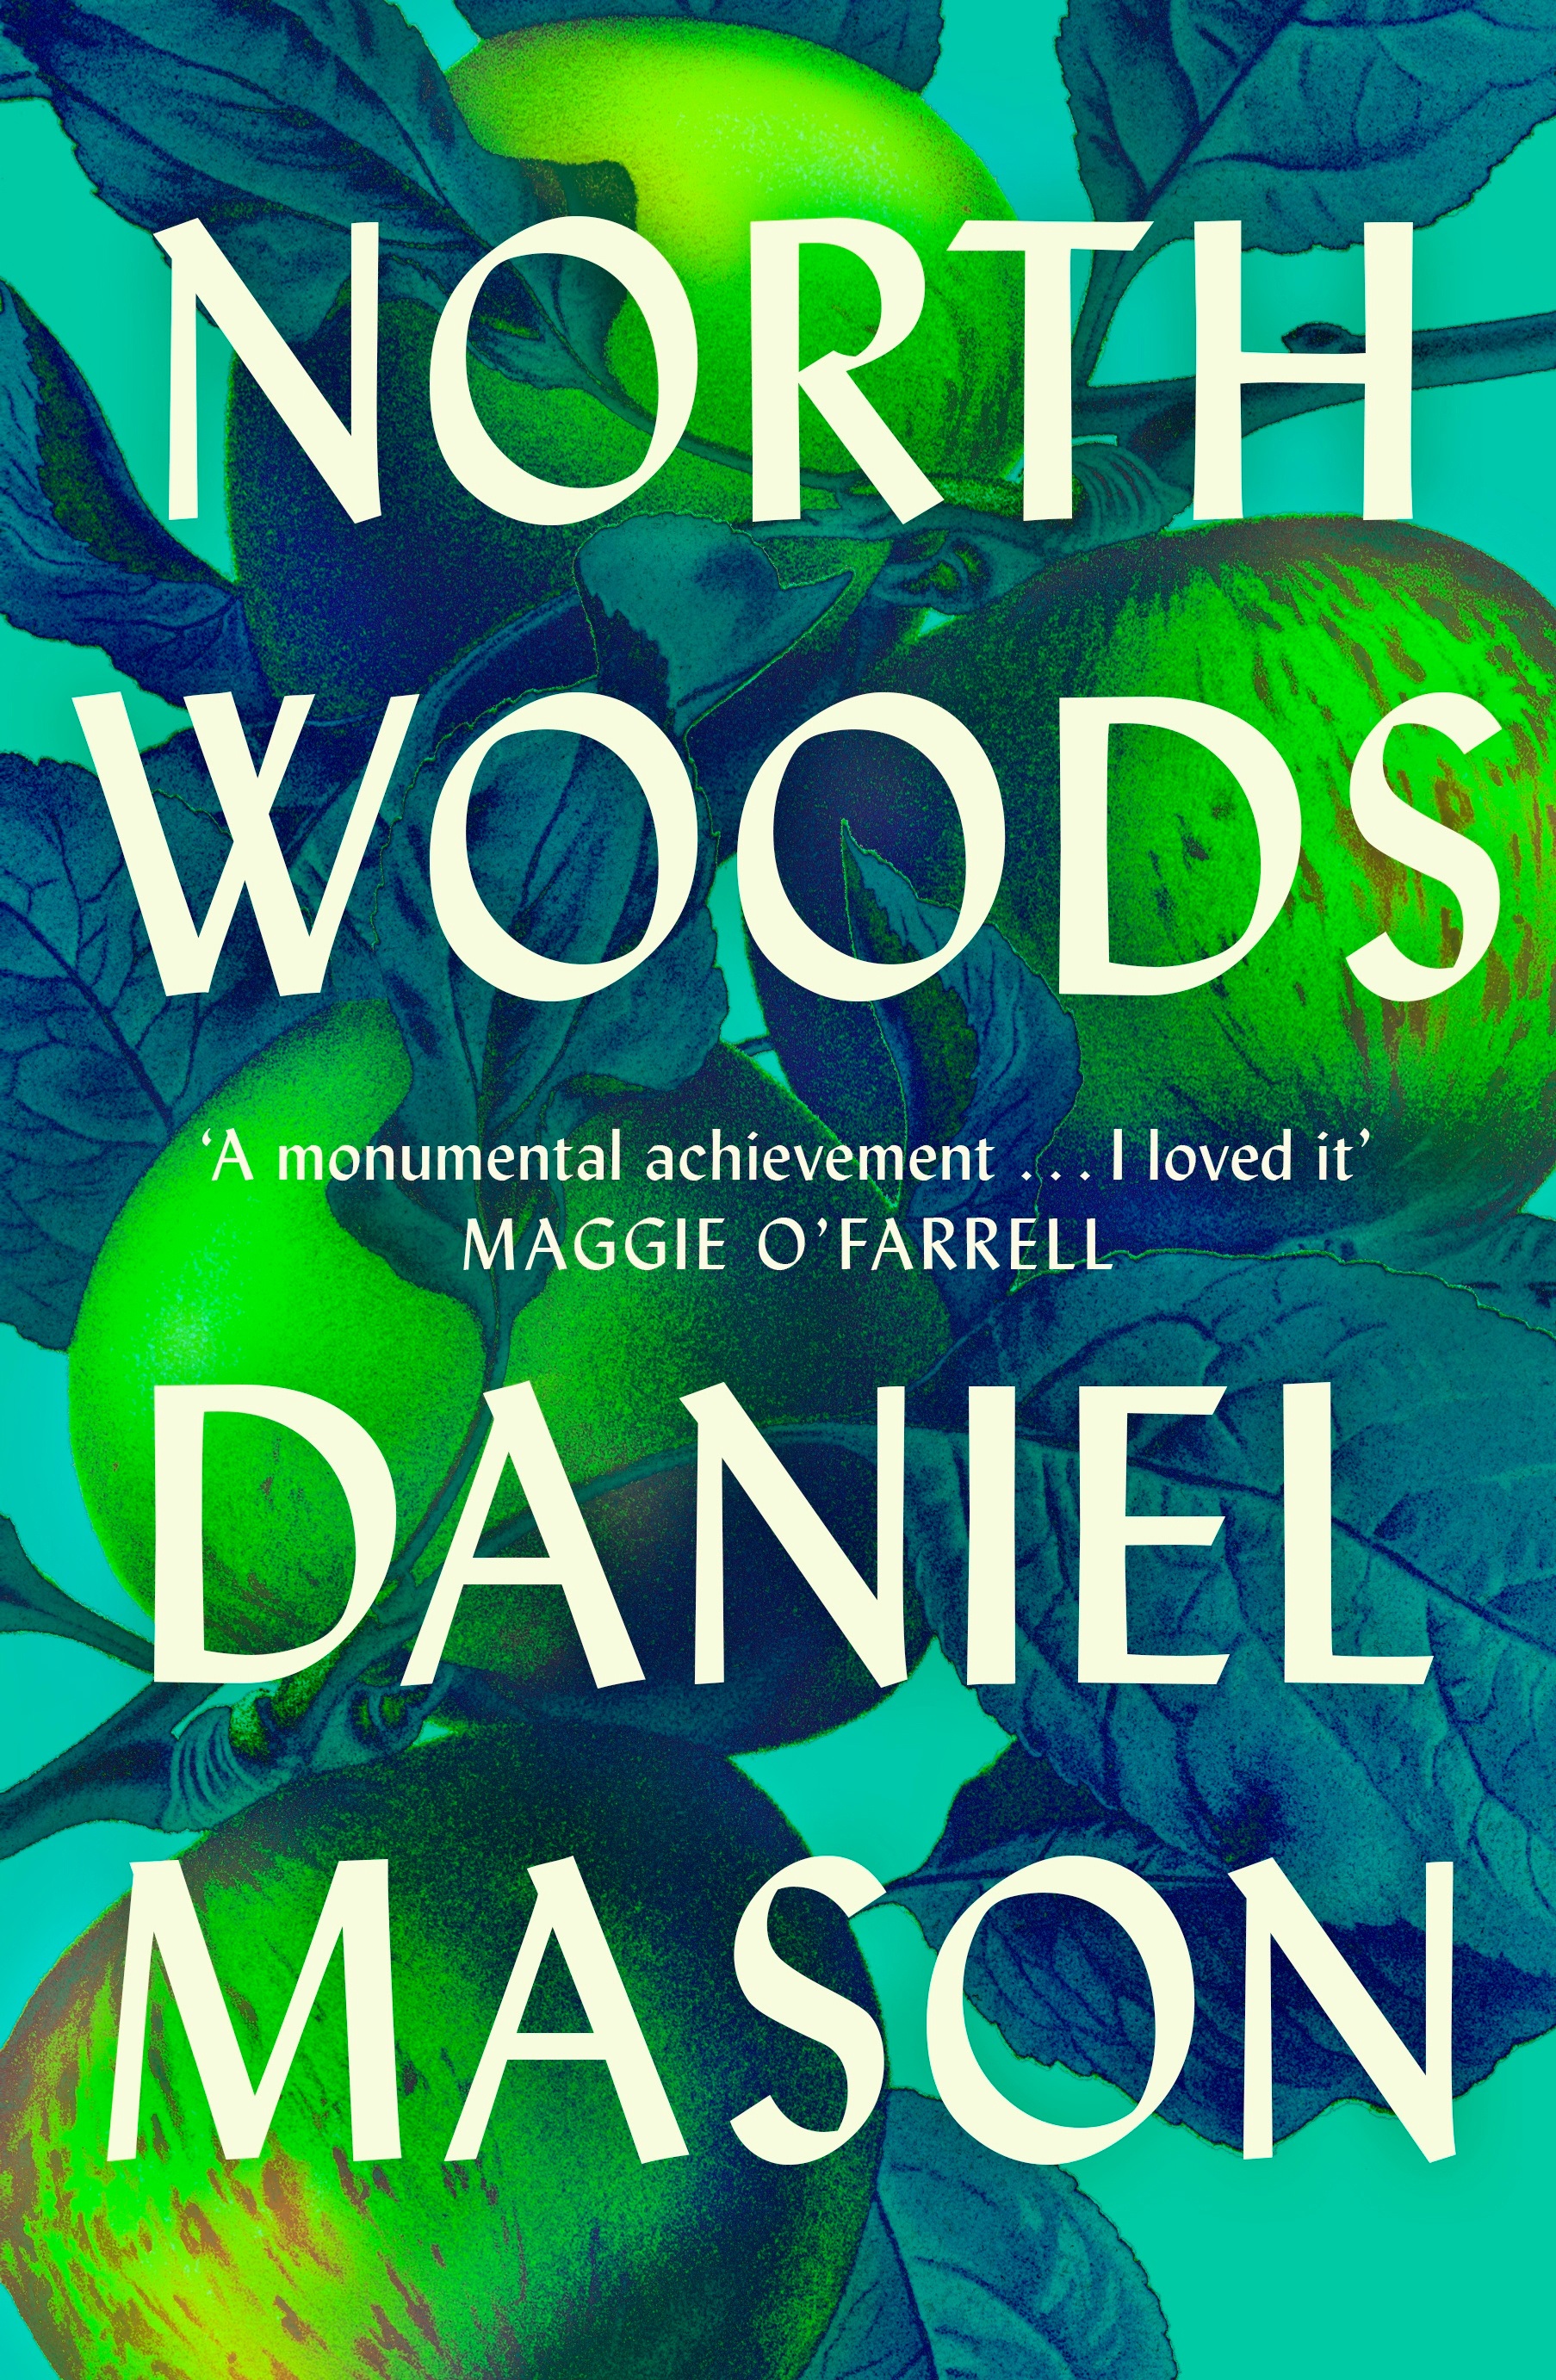 A book cover showing an illustration of four bright green apples, dark green leaves, a light blue background, white text on top